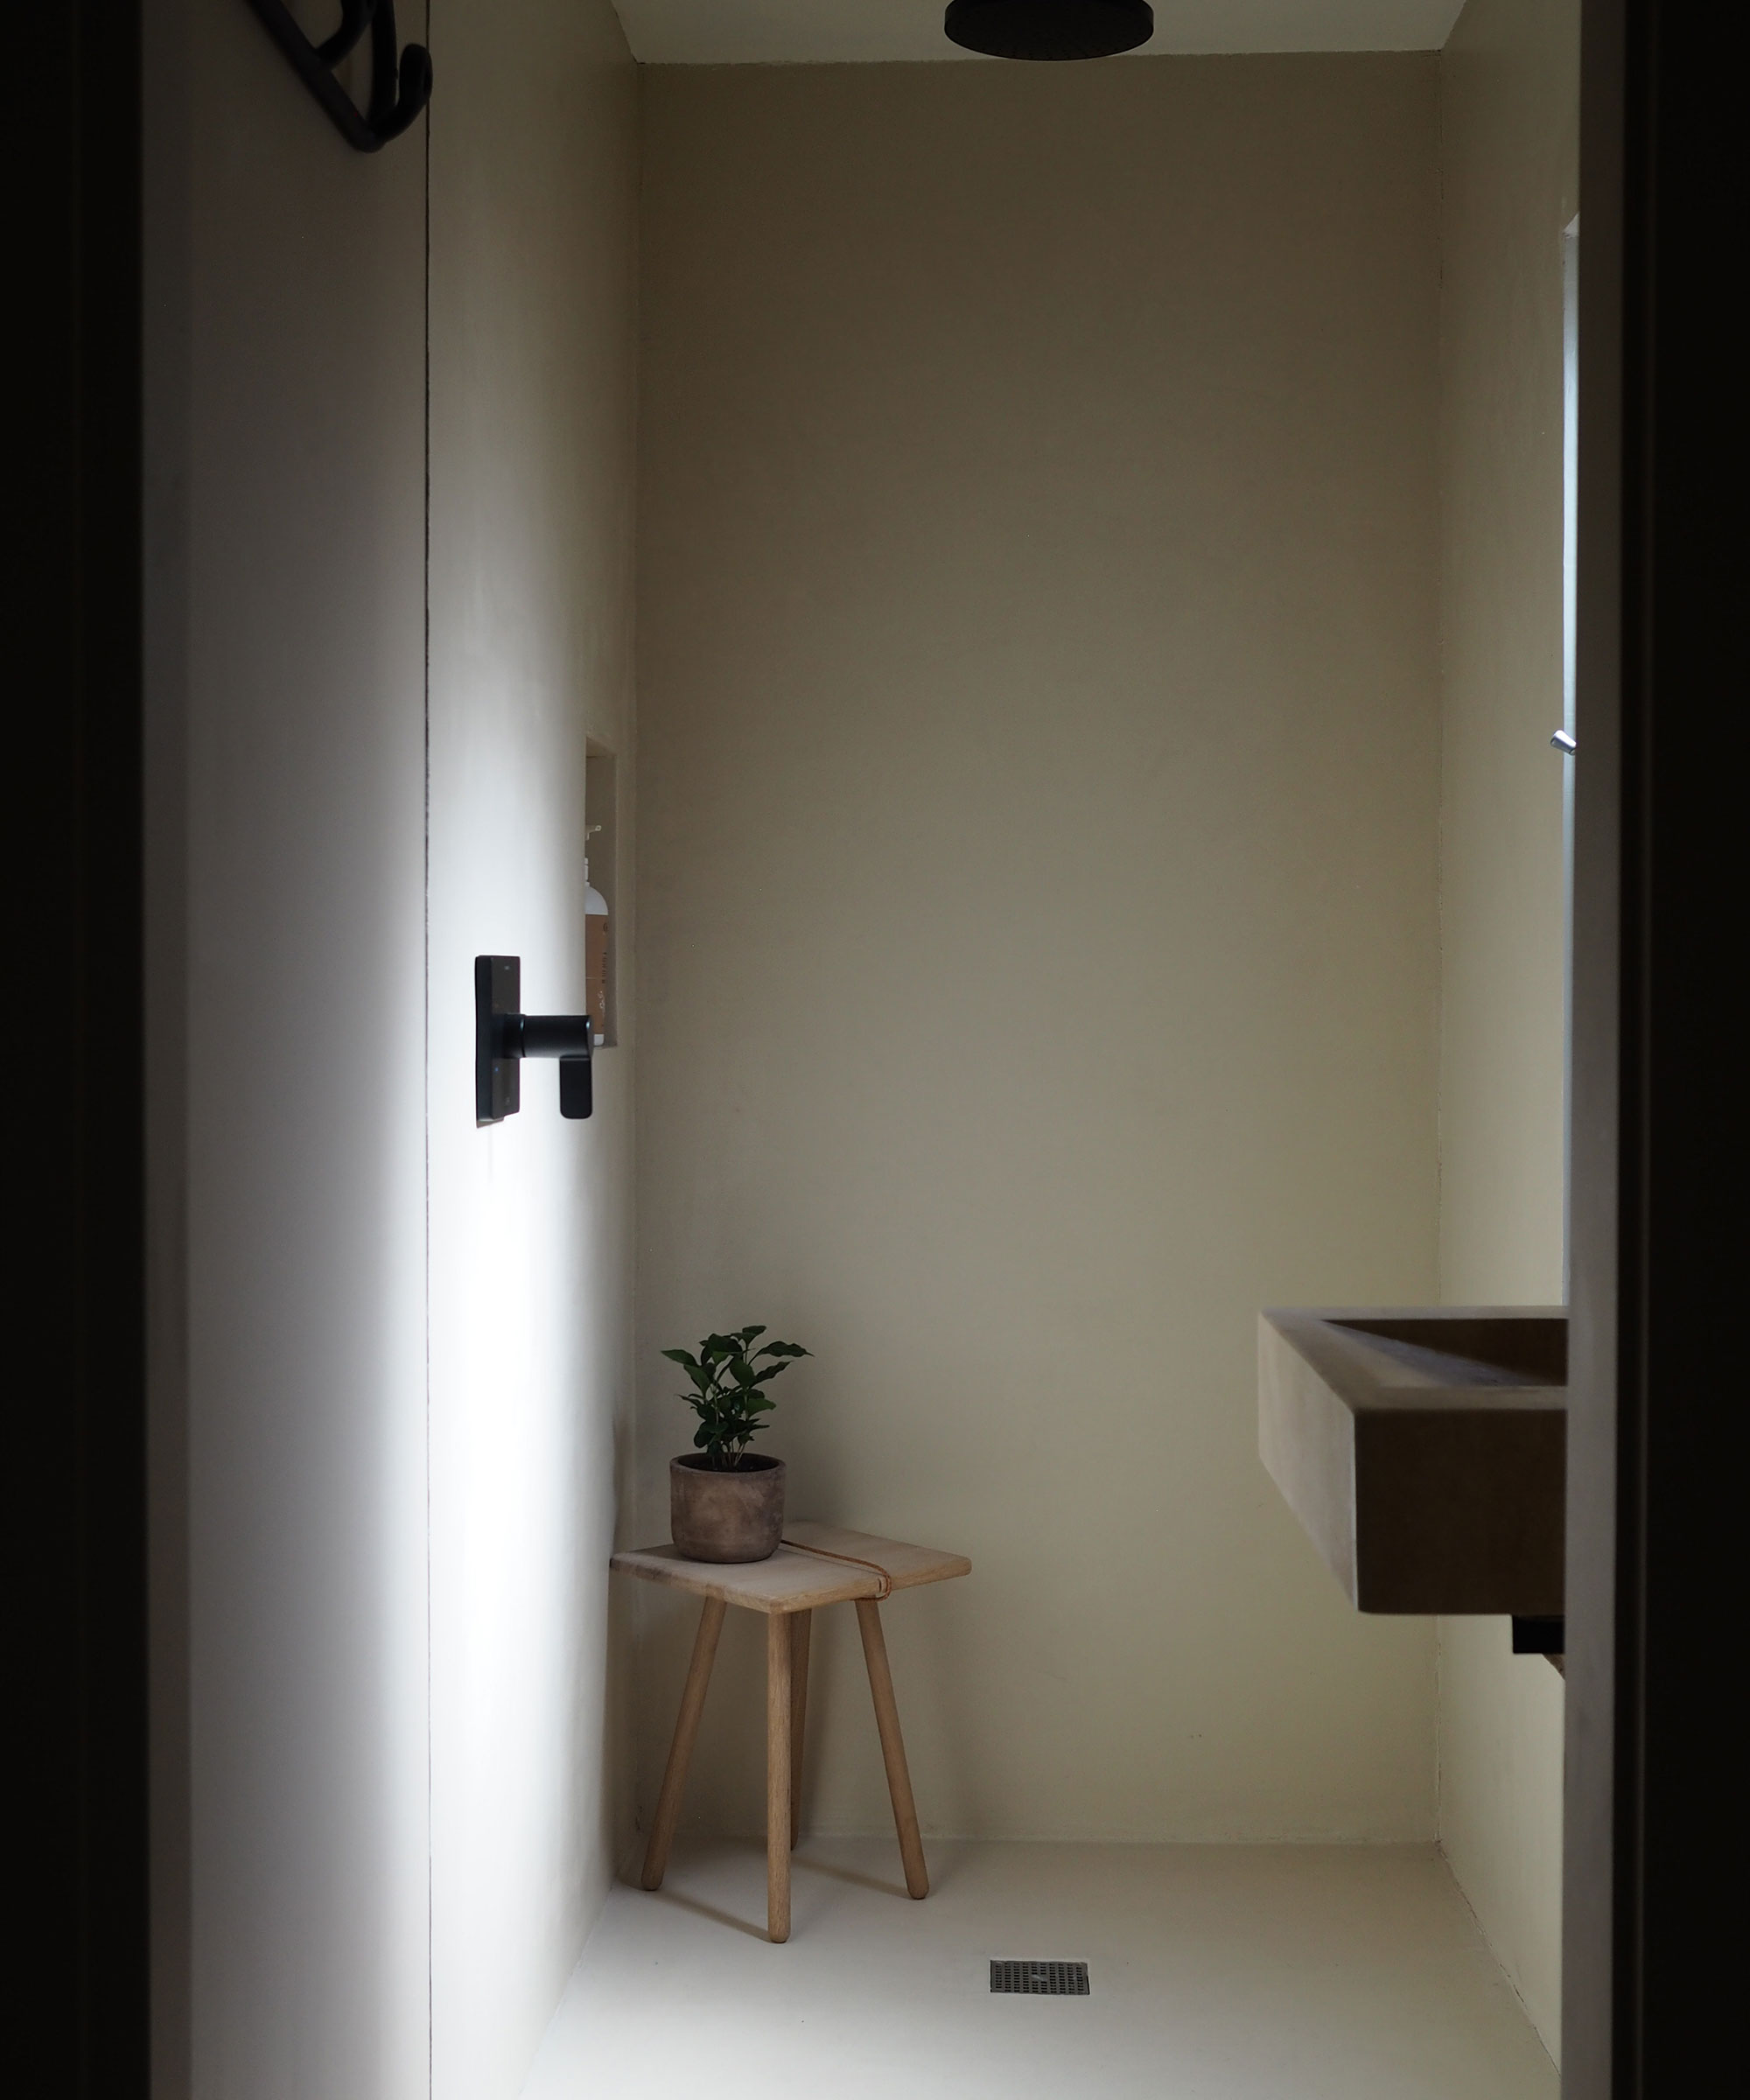 Concrete finish shower with black fixtures and wooden stool with plant in corner